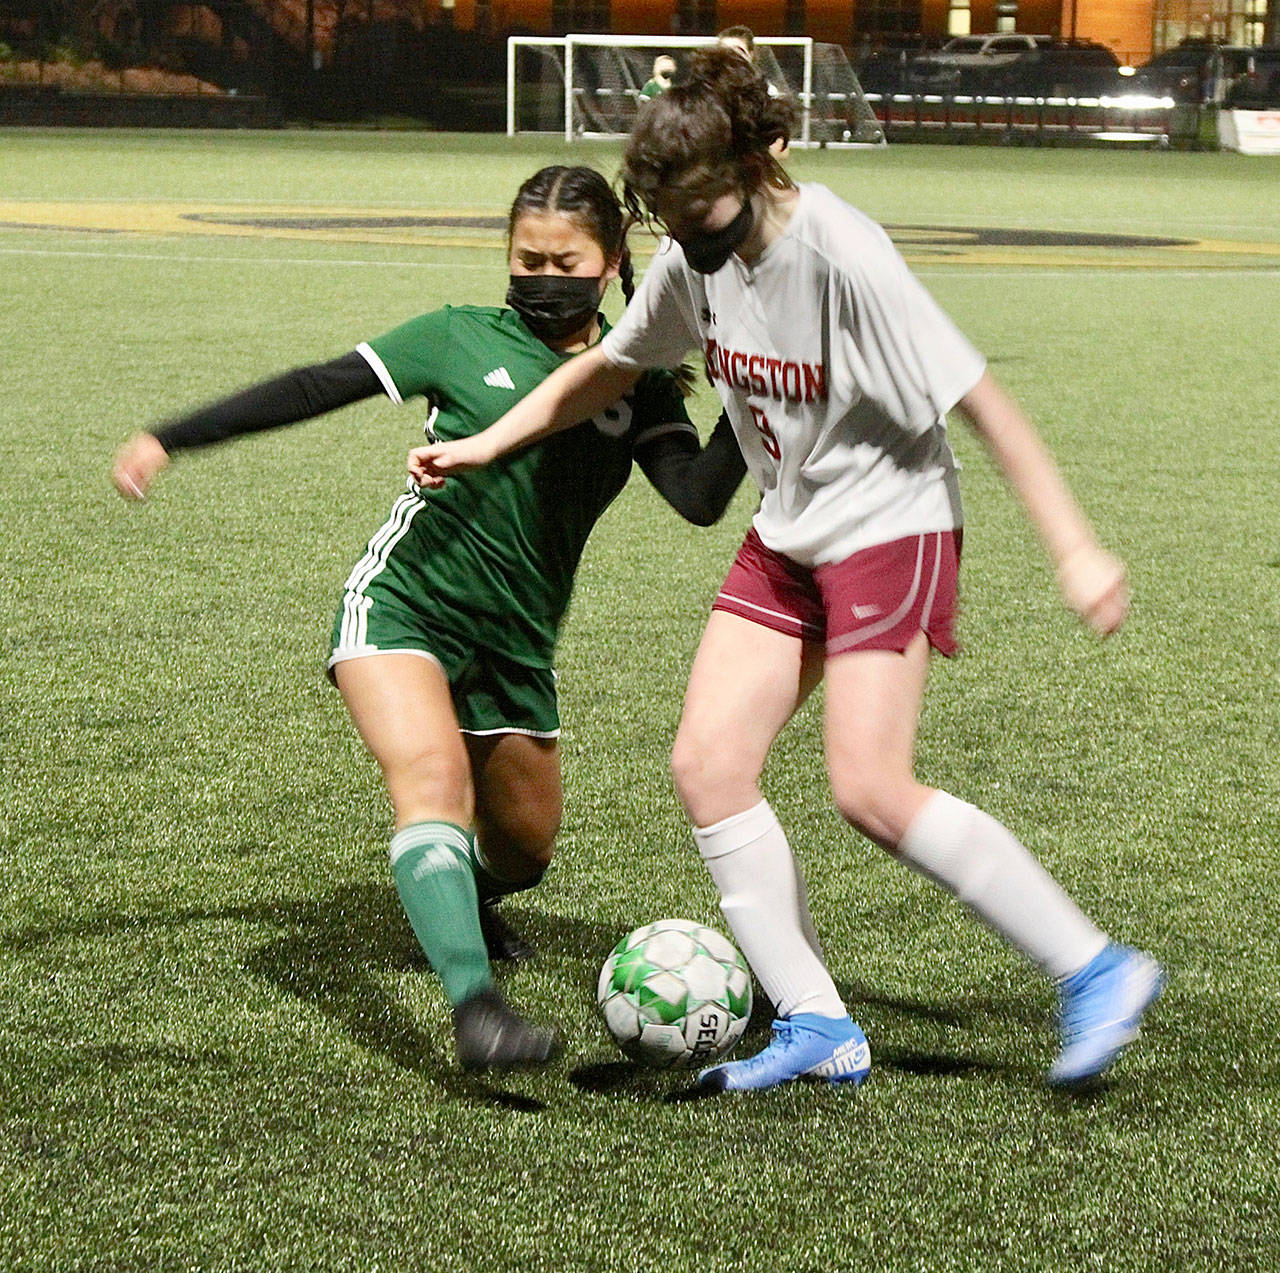 <strong>Dave Logan</strong>/for Peninsula Daily News
Port Angeles’ Lily Sanders (6) tries to take the ball away from Cora Caidis of Kingston during Monday’s match at Wally Sigmar Field. The Roughriders won 4-1.